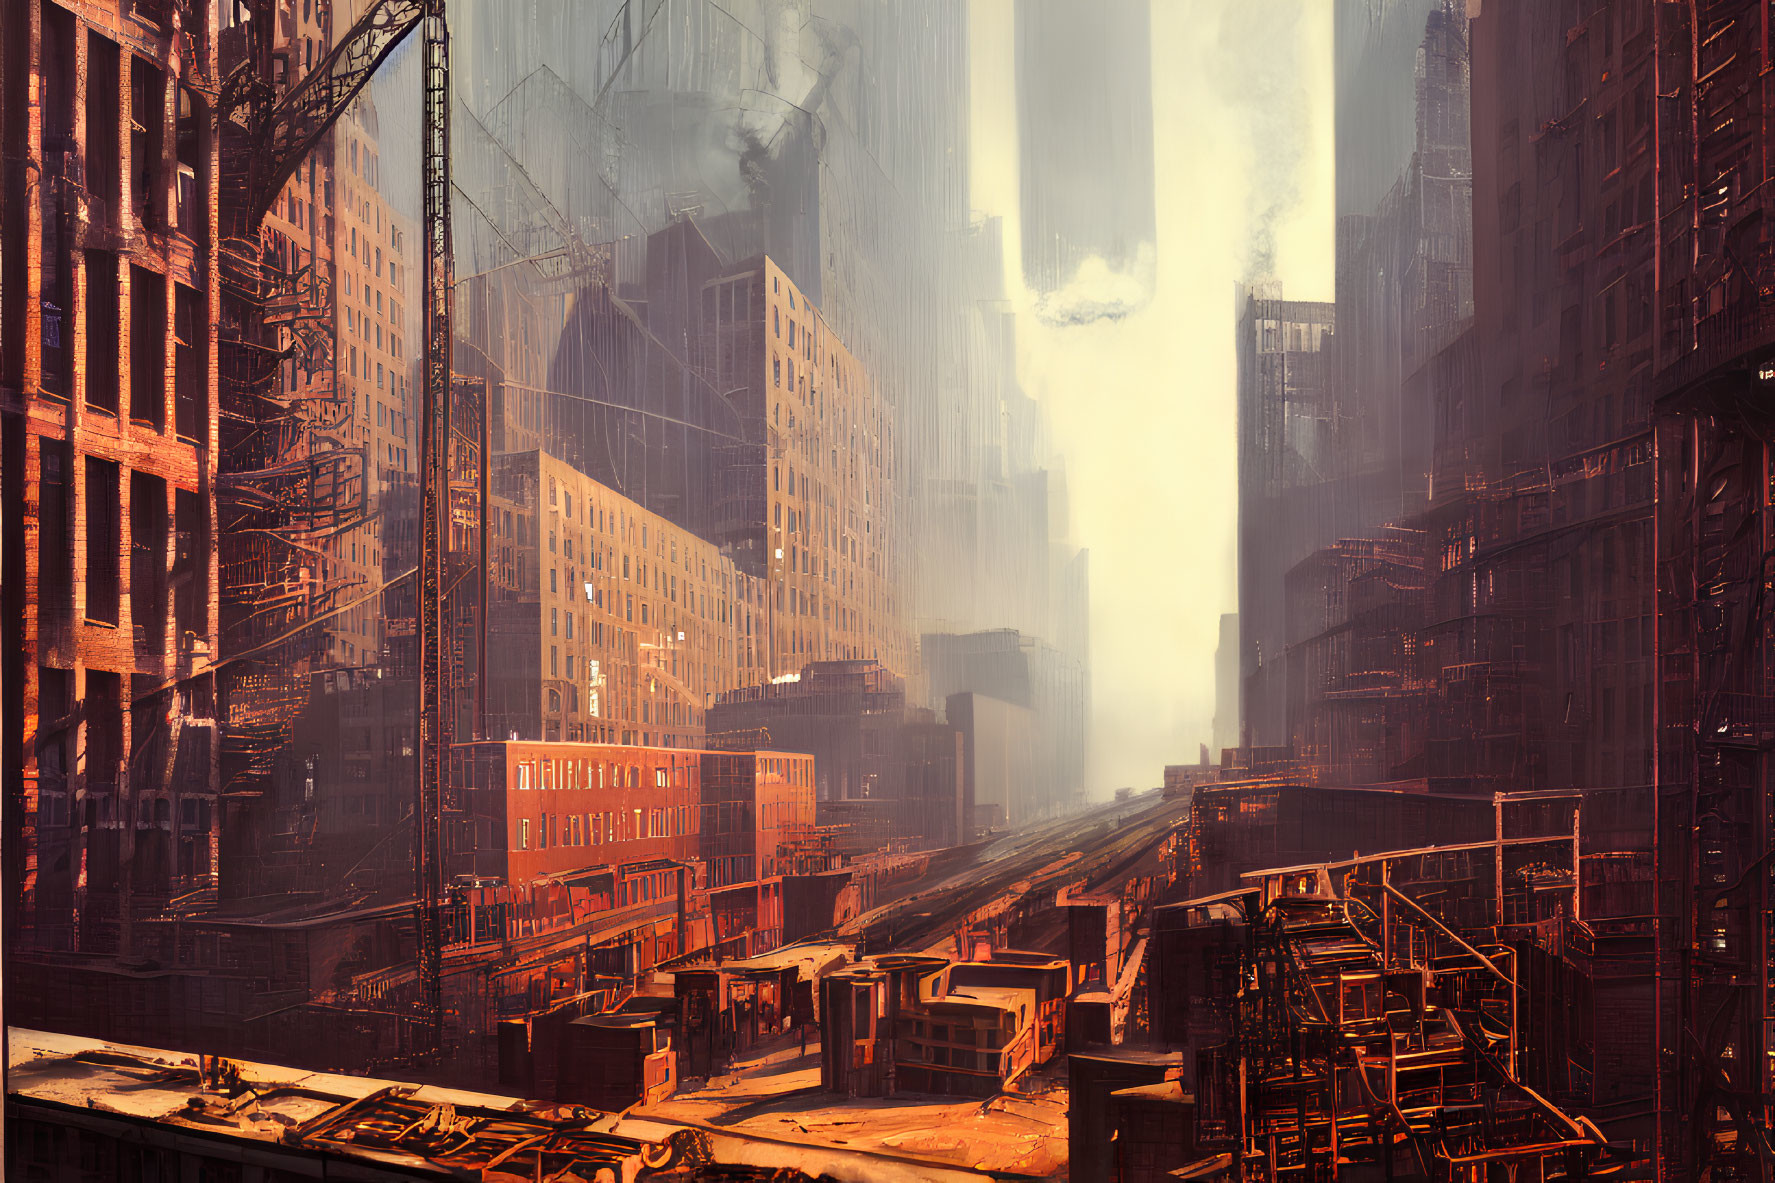 Dystopian cityscape with towering buildings and rail system